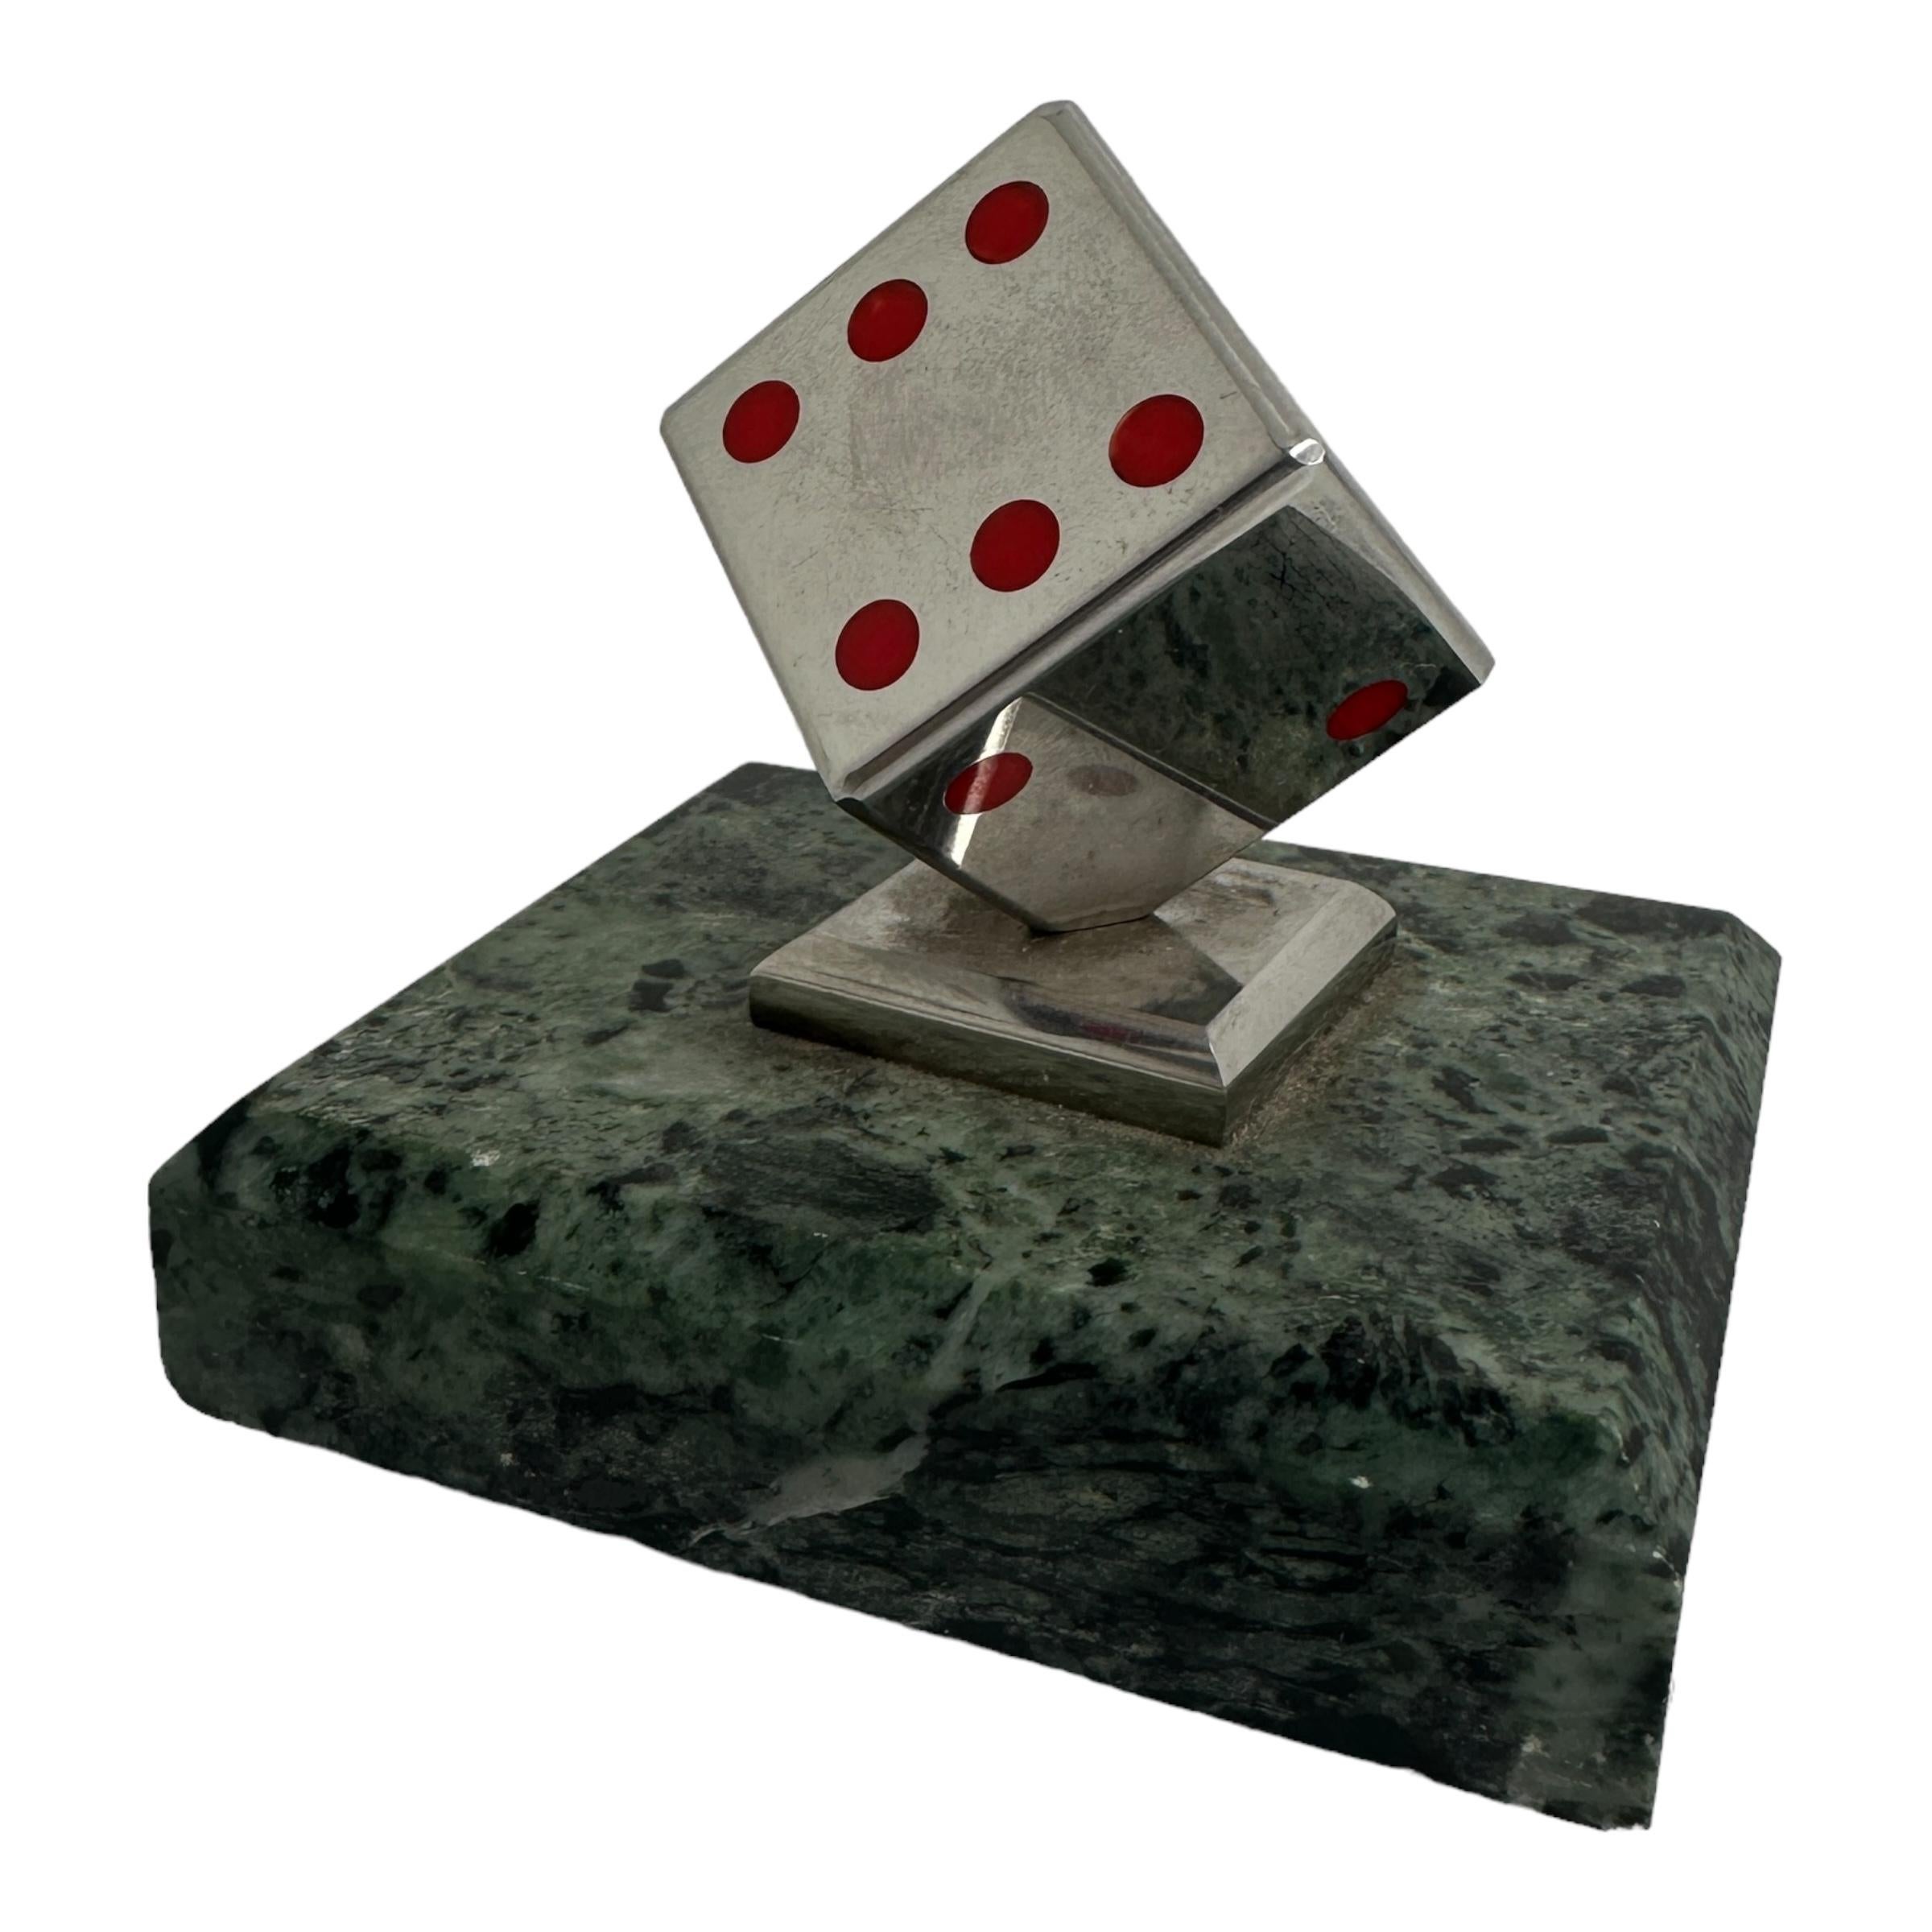 Dice Metal Statue on Marble Base Paper Weight Mid-Century Modern, German, 1970s For Sale 2